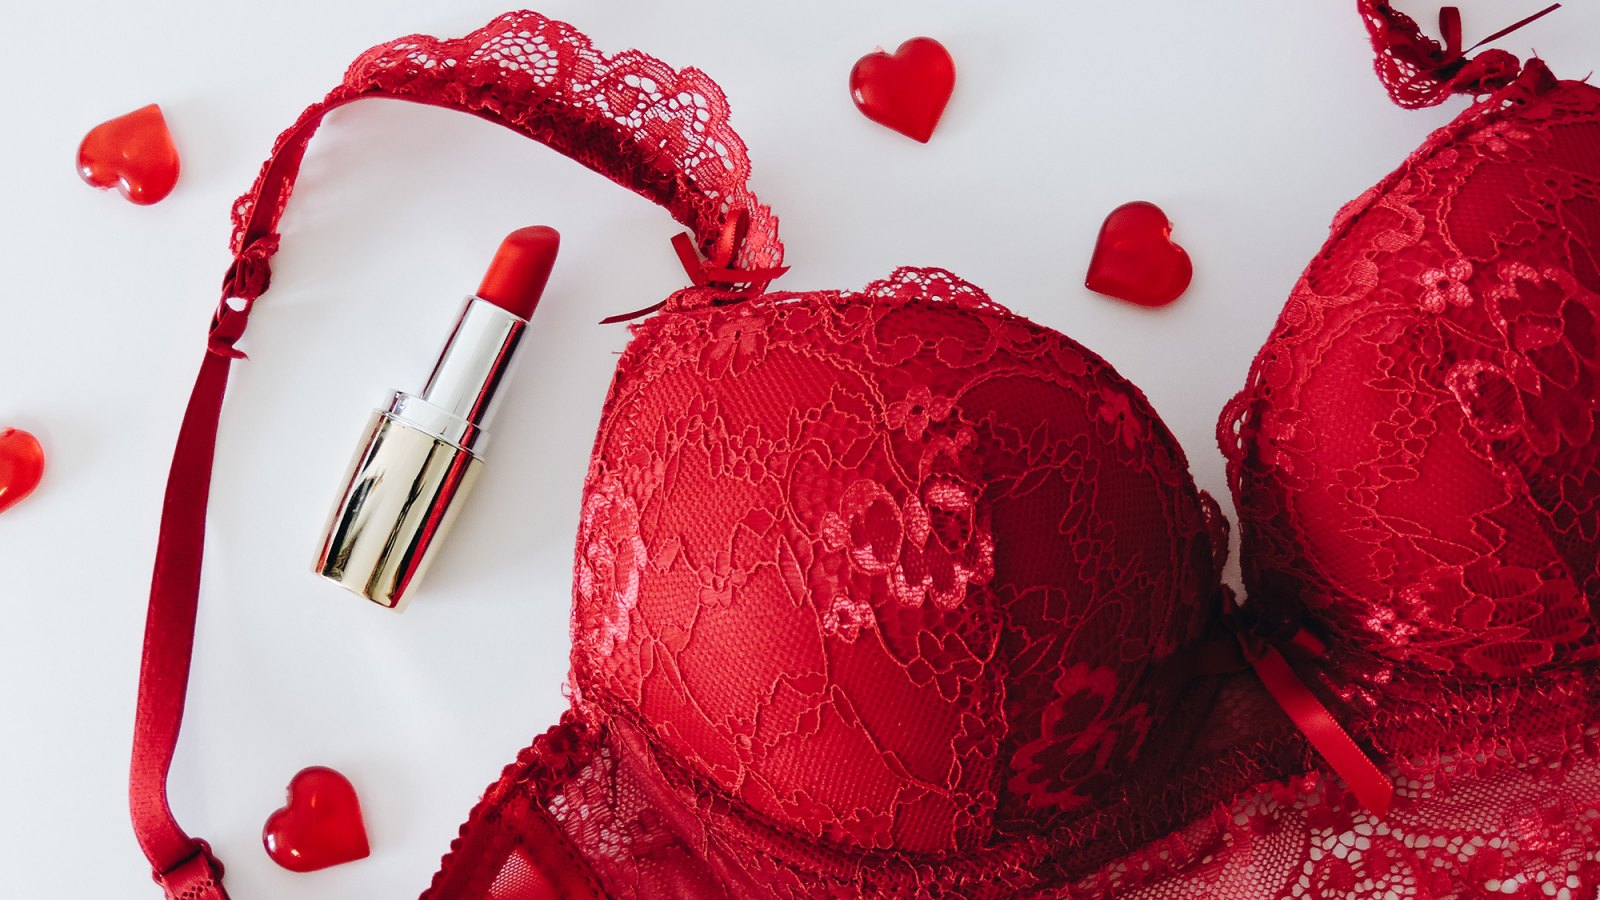 High Coverage Bra For Valentines Day